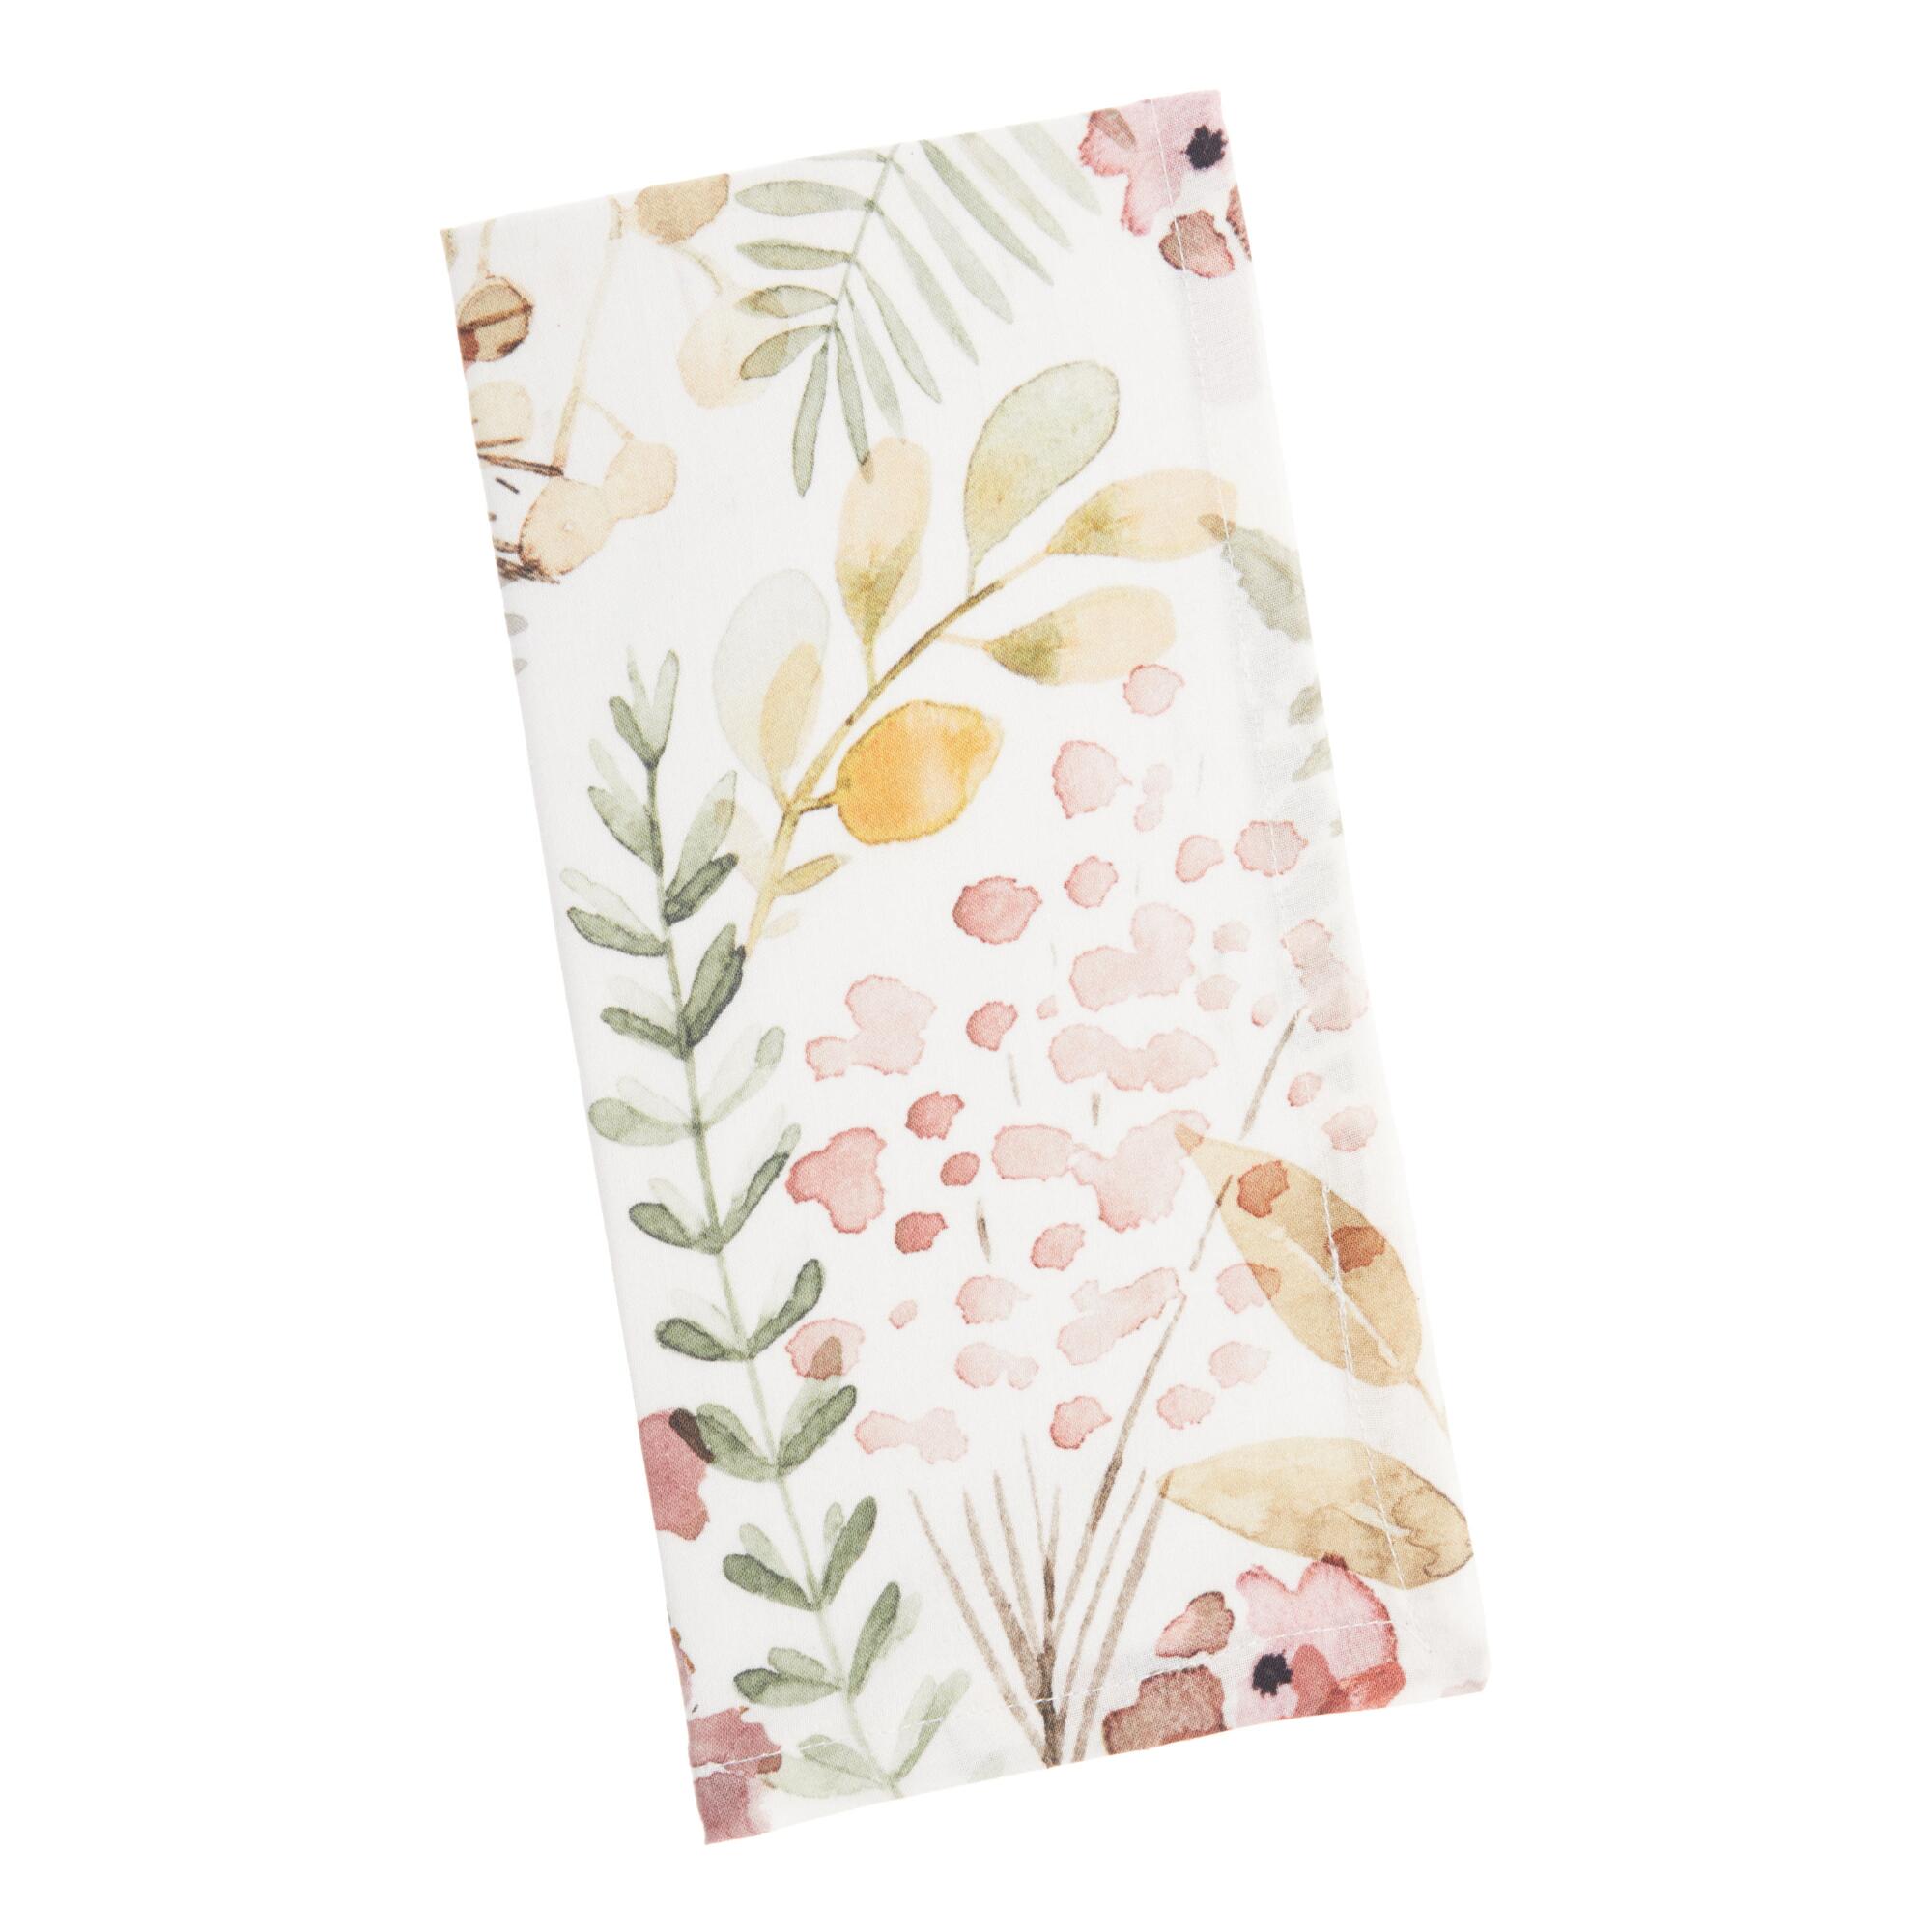 Green and Pink Fall Field Napkins Set of 4 by World Market